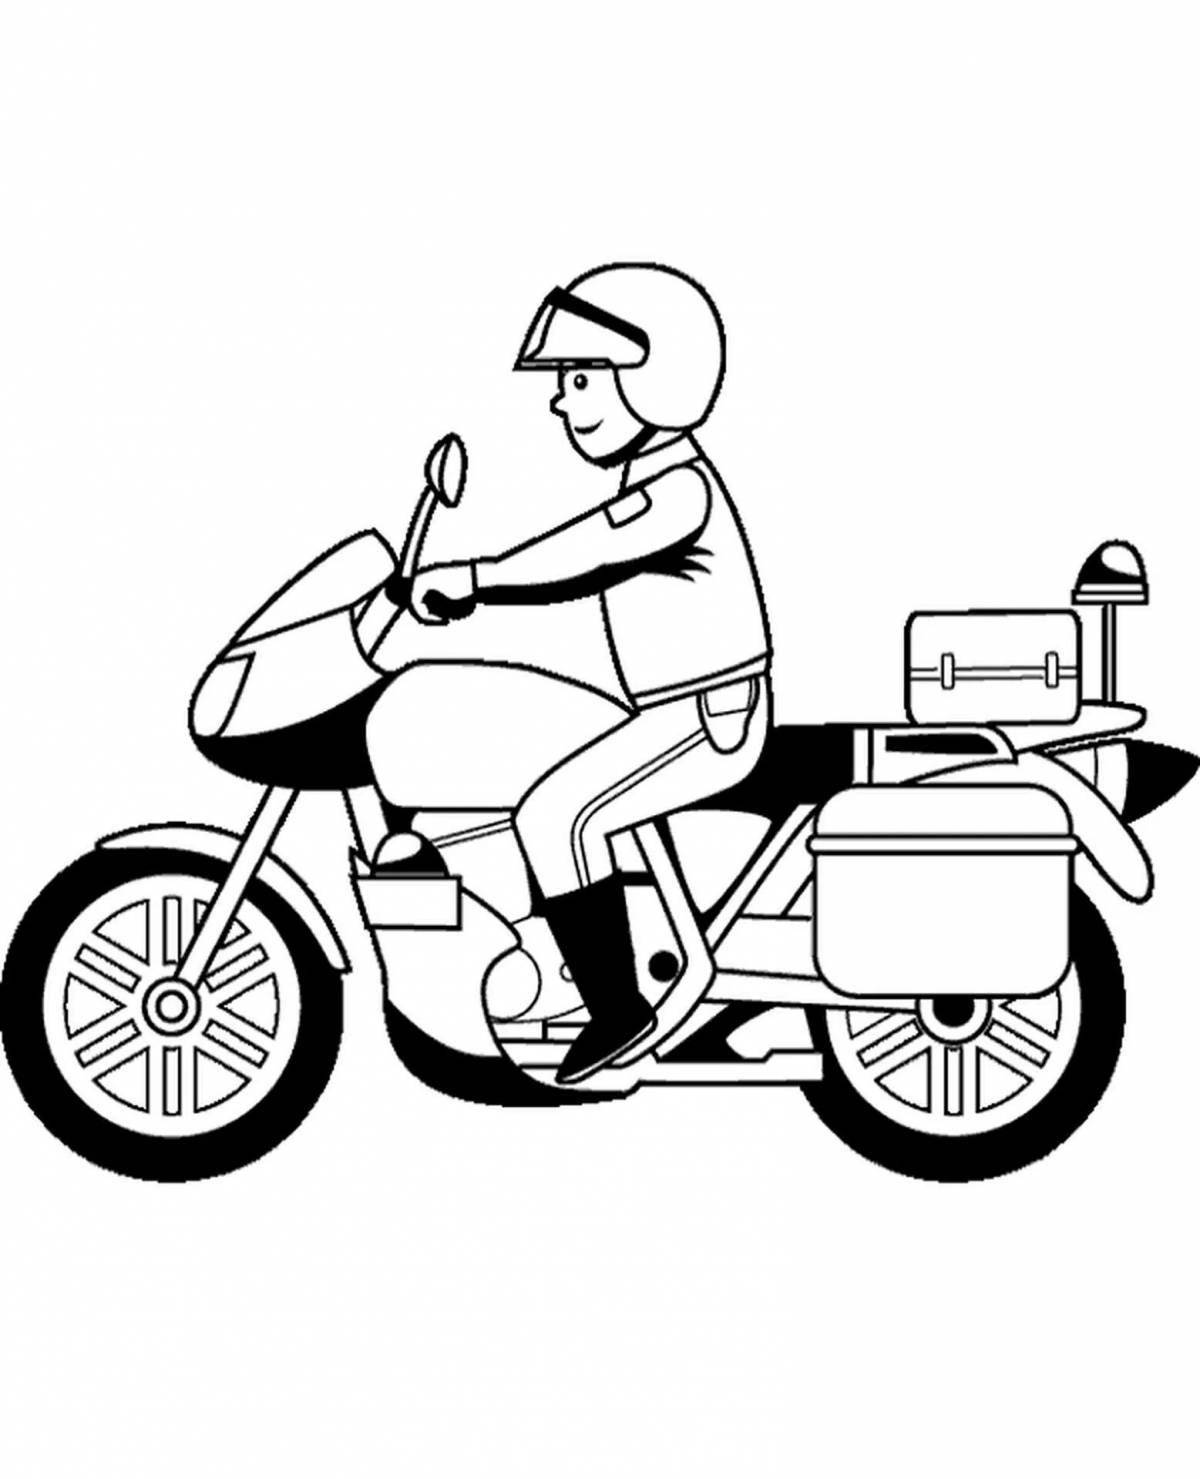 Generous military motorcycle coloring book